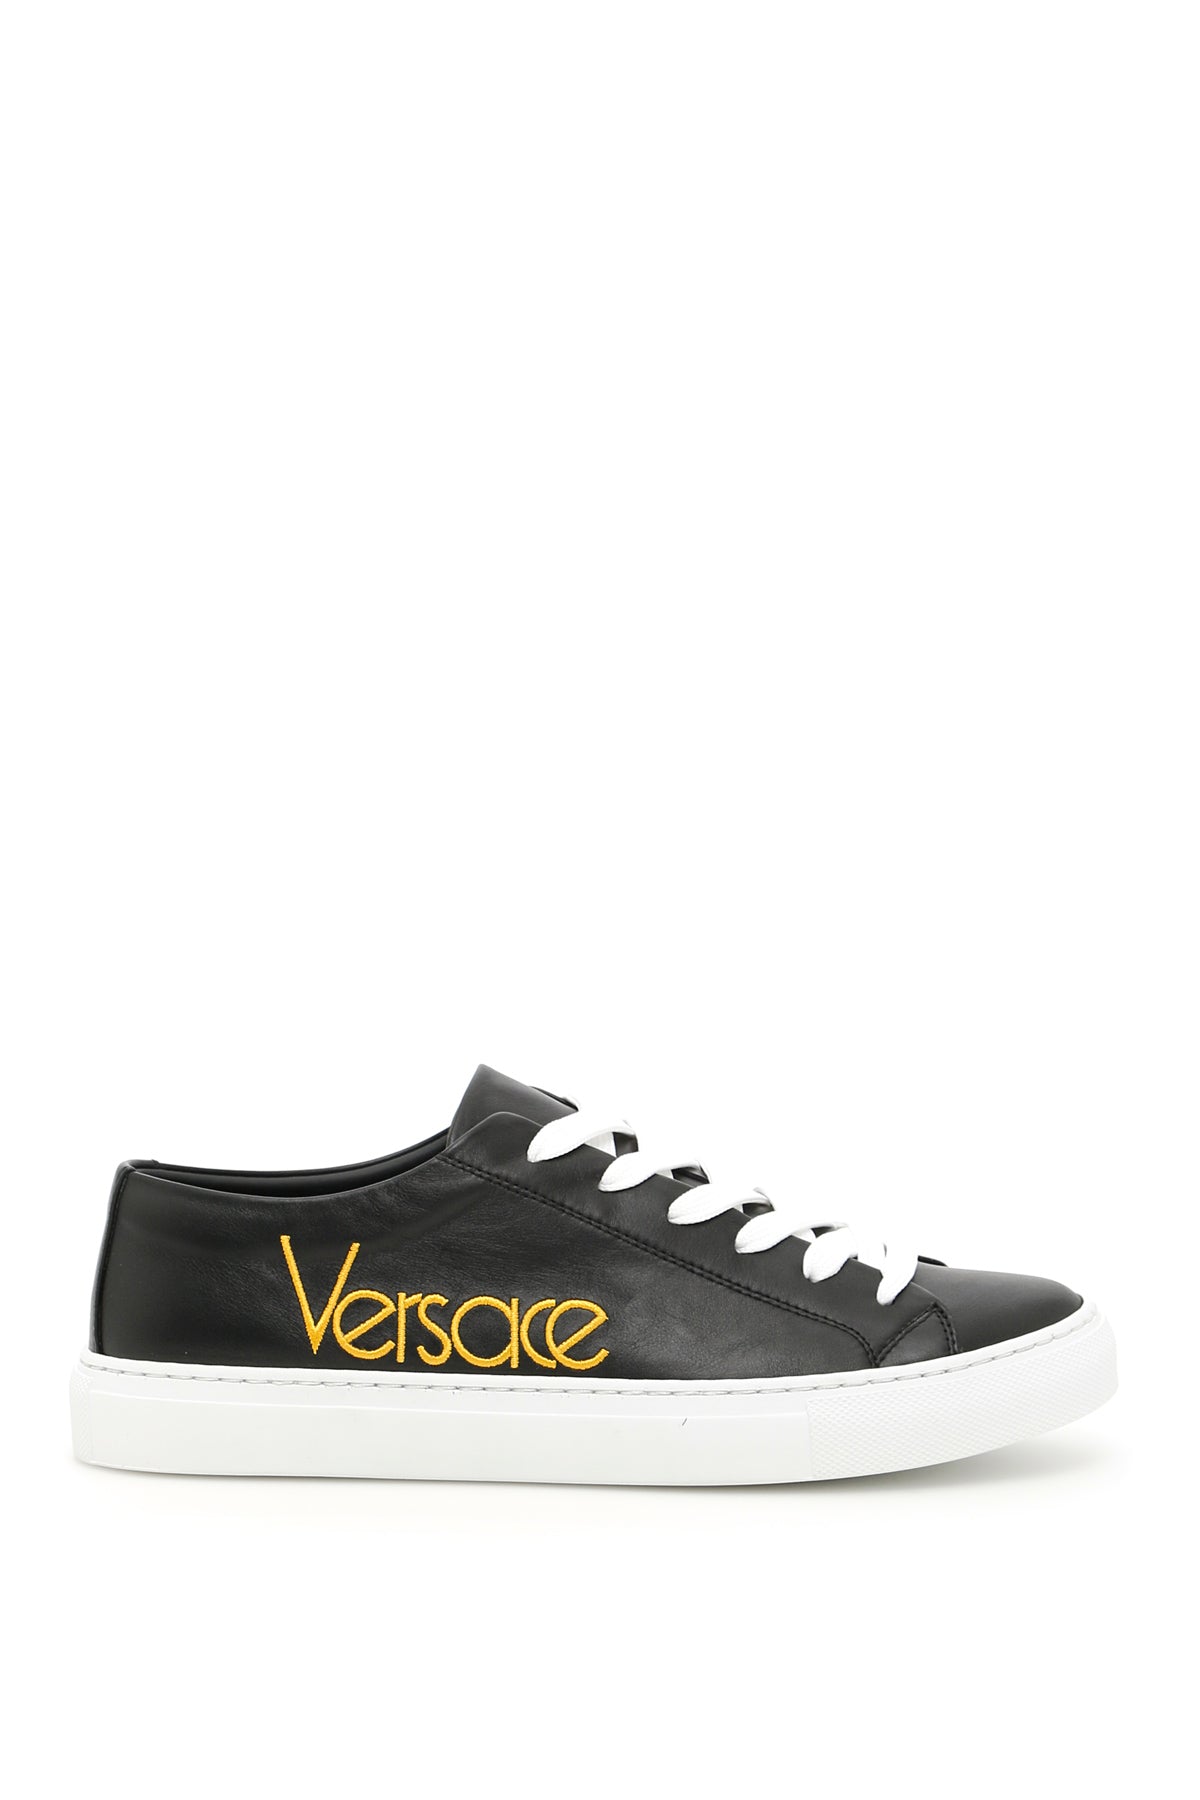 VERSACE VERSACE EMBROIDERED LOGO SNEAKERS